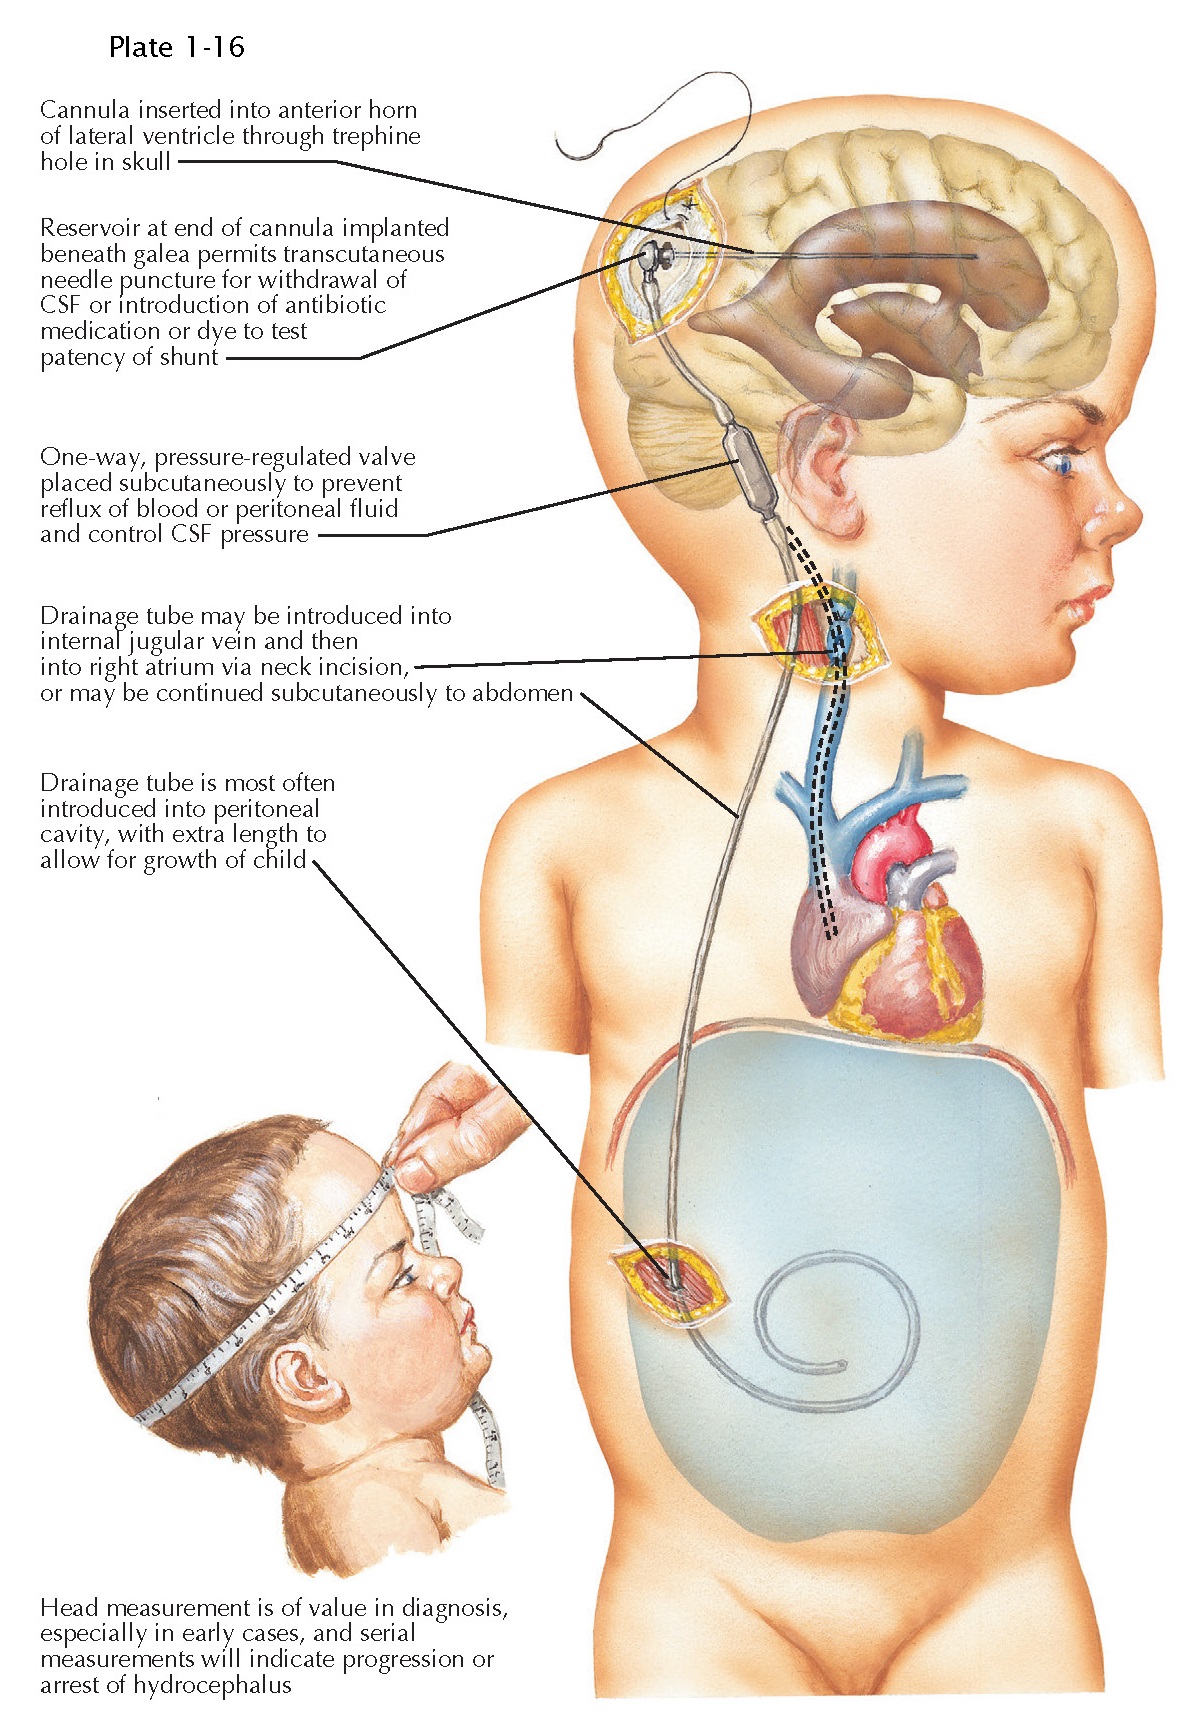 SURGICAL TREATMENT OF HYDROCEPHALUS